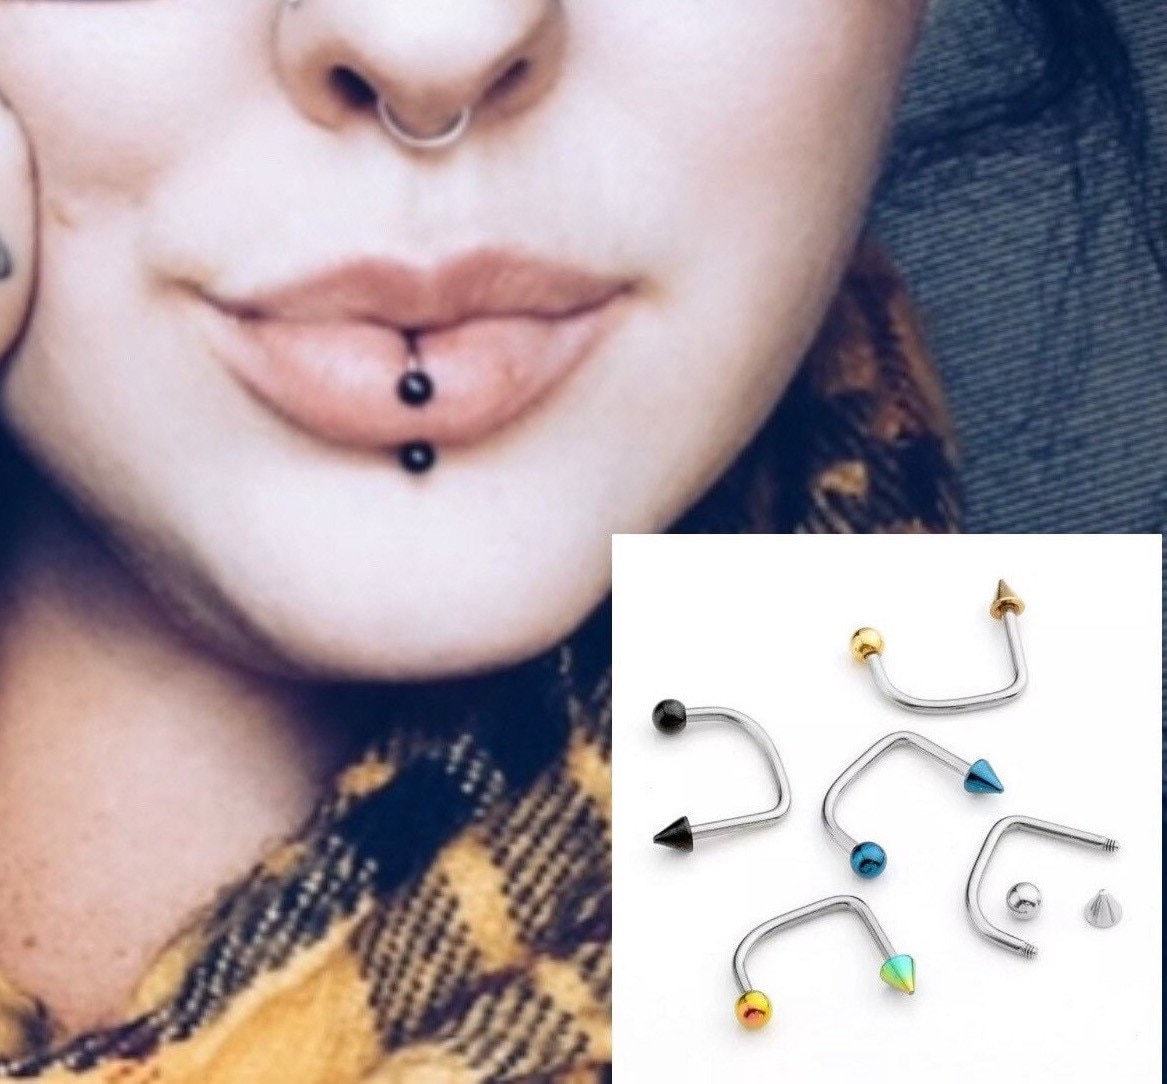 Anodized Titanium 16ga Lippy Loop Labret 4mm Ball Pack of 2